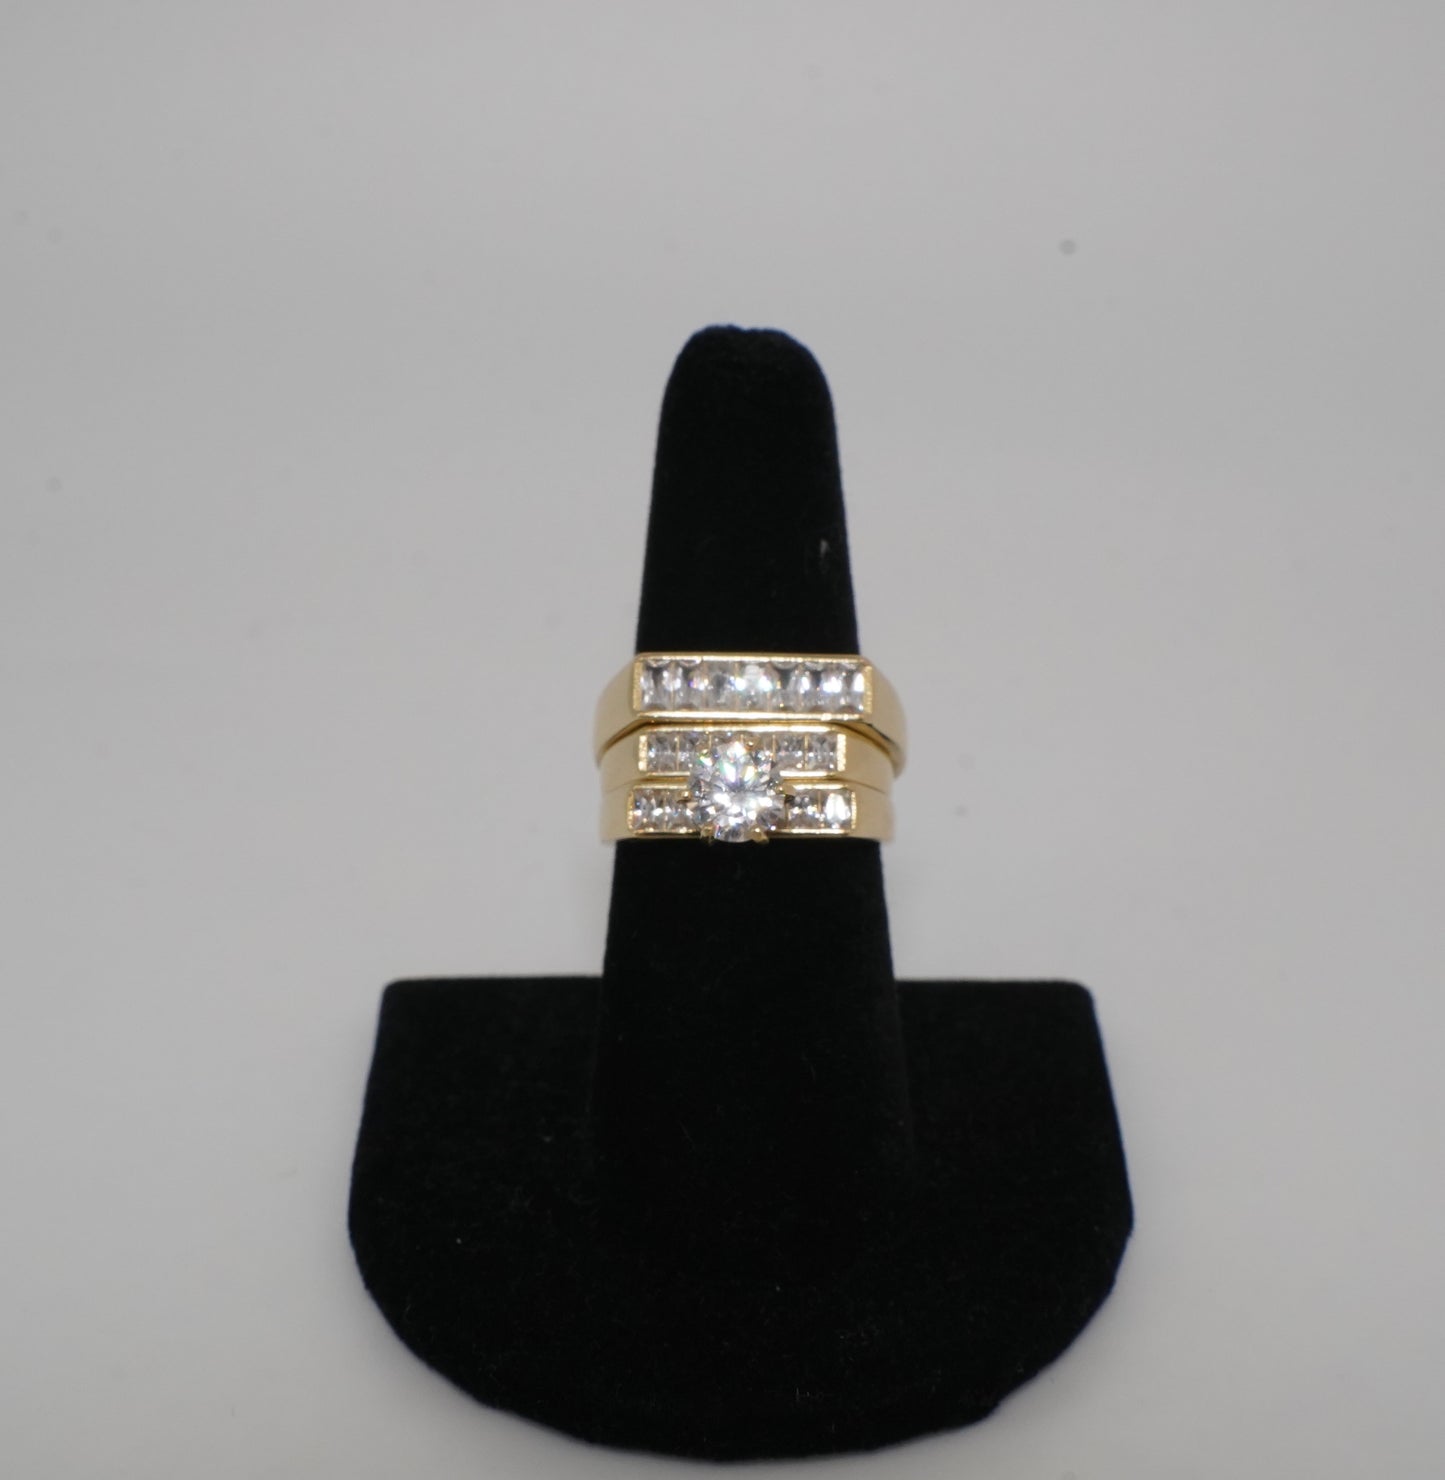 THREE PIECE MARRIAGE RING 14K YELLOW GOLD